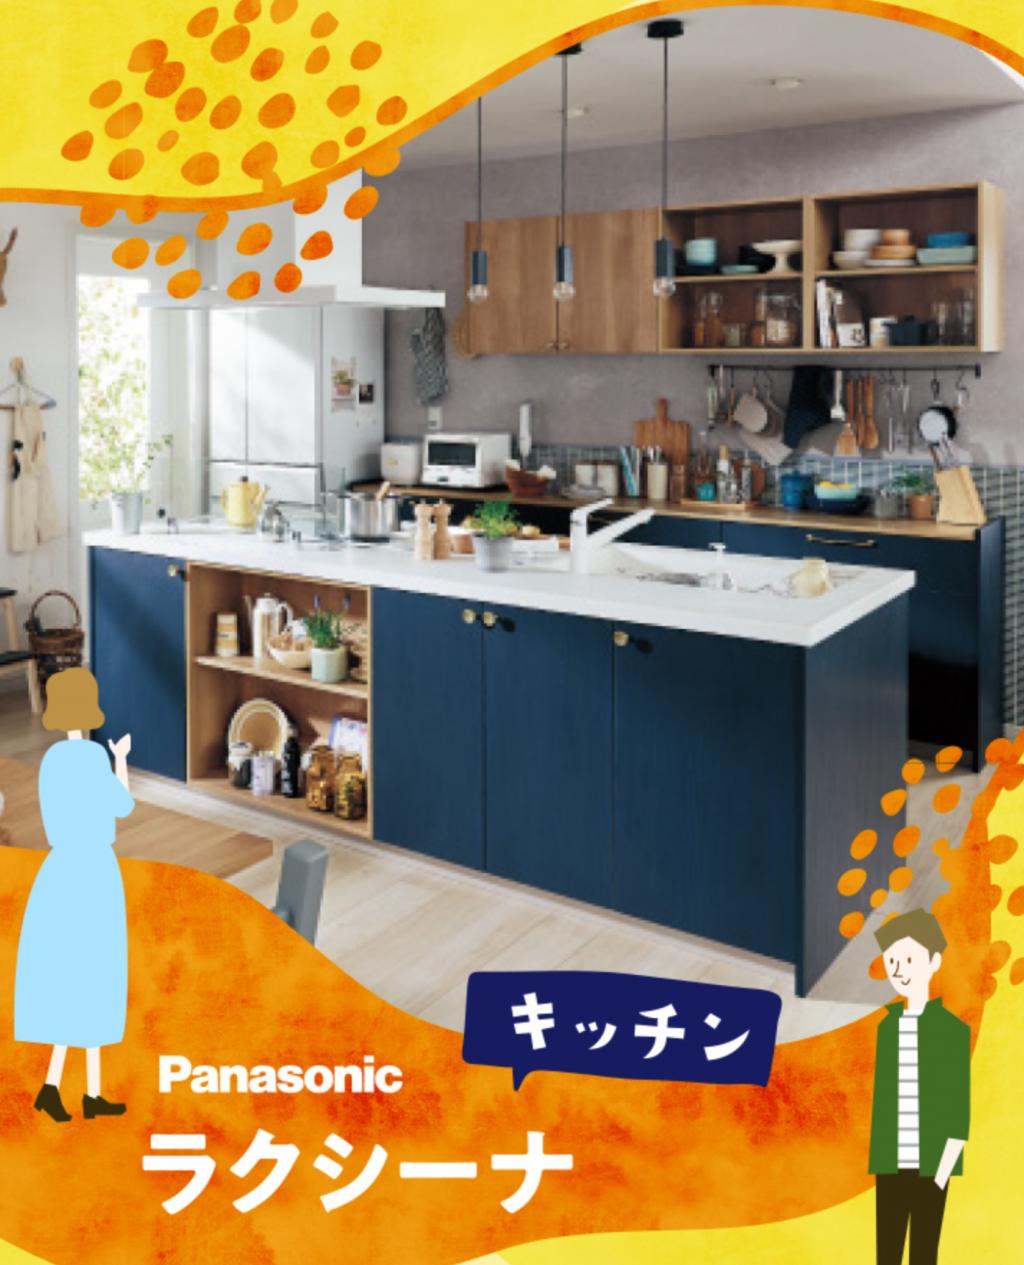 9/4 (Sat) 5 (Sun) Izumiya Hirakata Store Held in the event space!You can see the latest kitchens and baths while playing games such as the coupler mencalange.Hiratsu Bonus available [Hiratsu Real Estate]